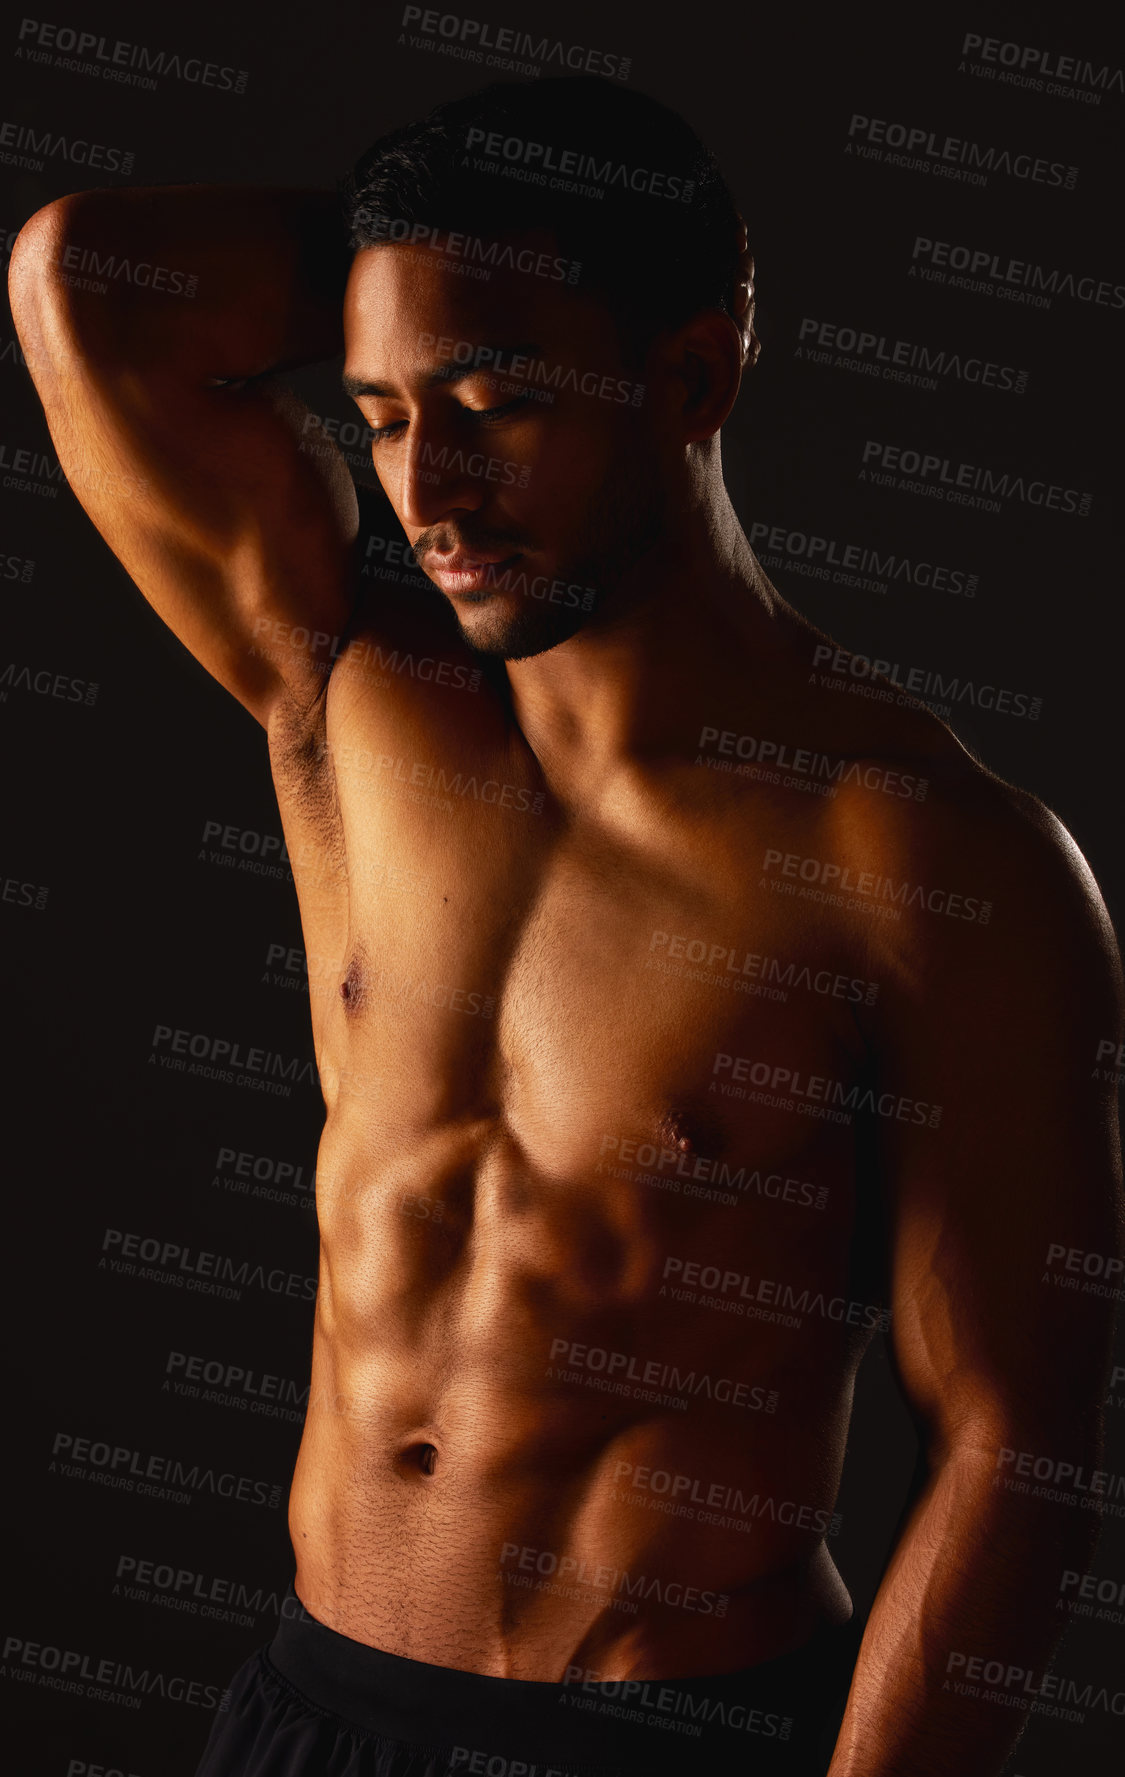 Buy stock photo Studio shot of a fit young man posing against a black background